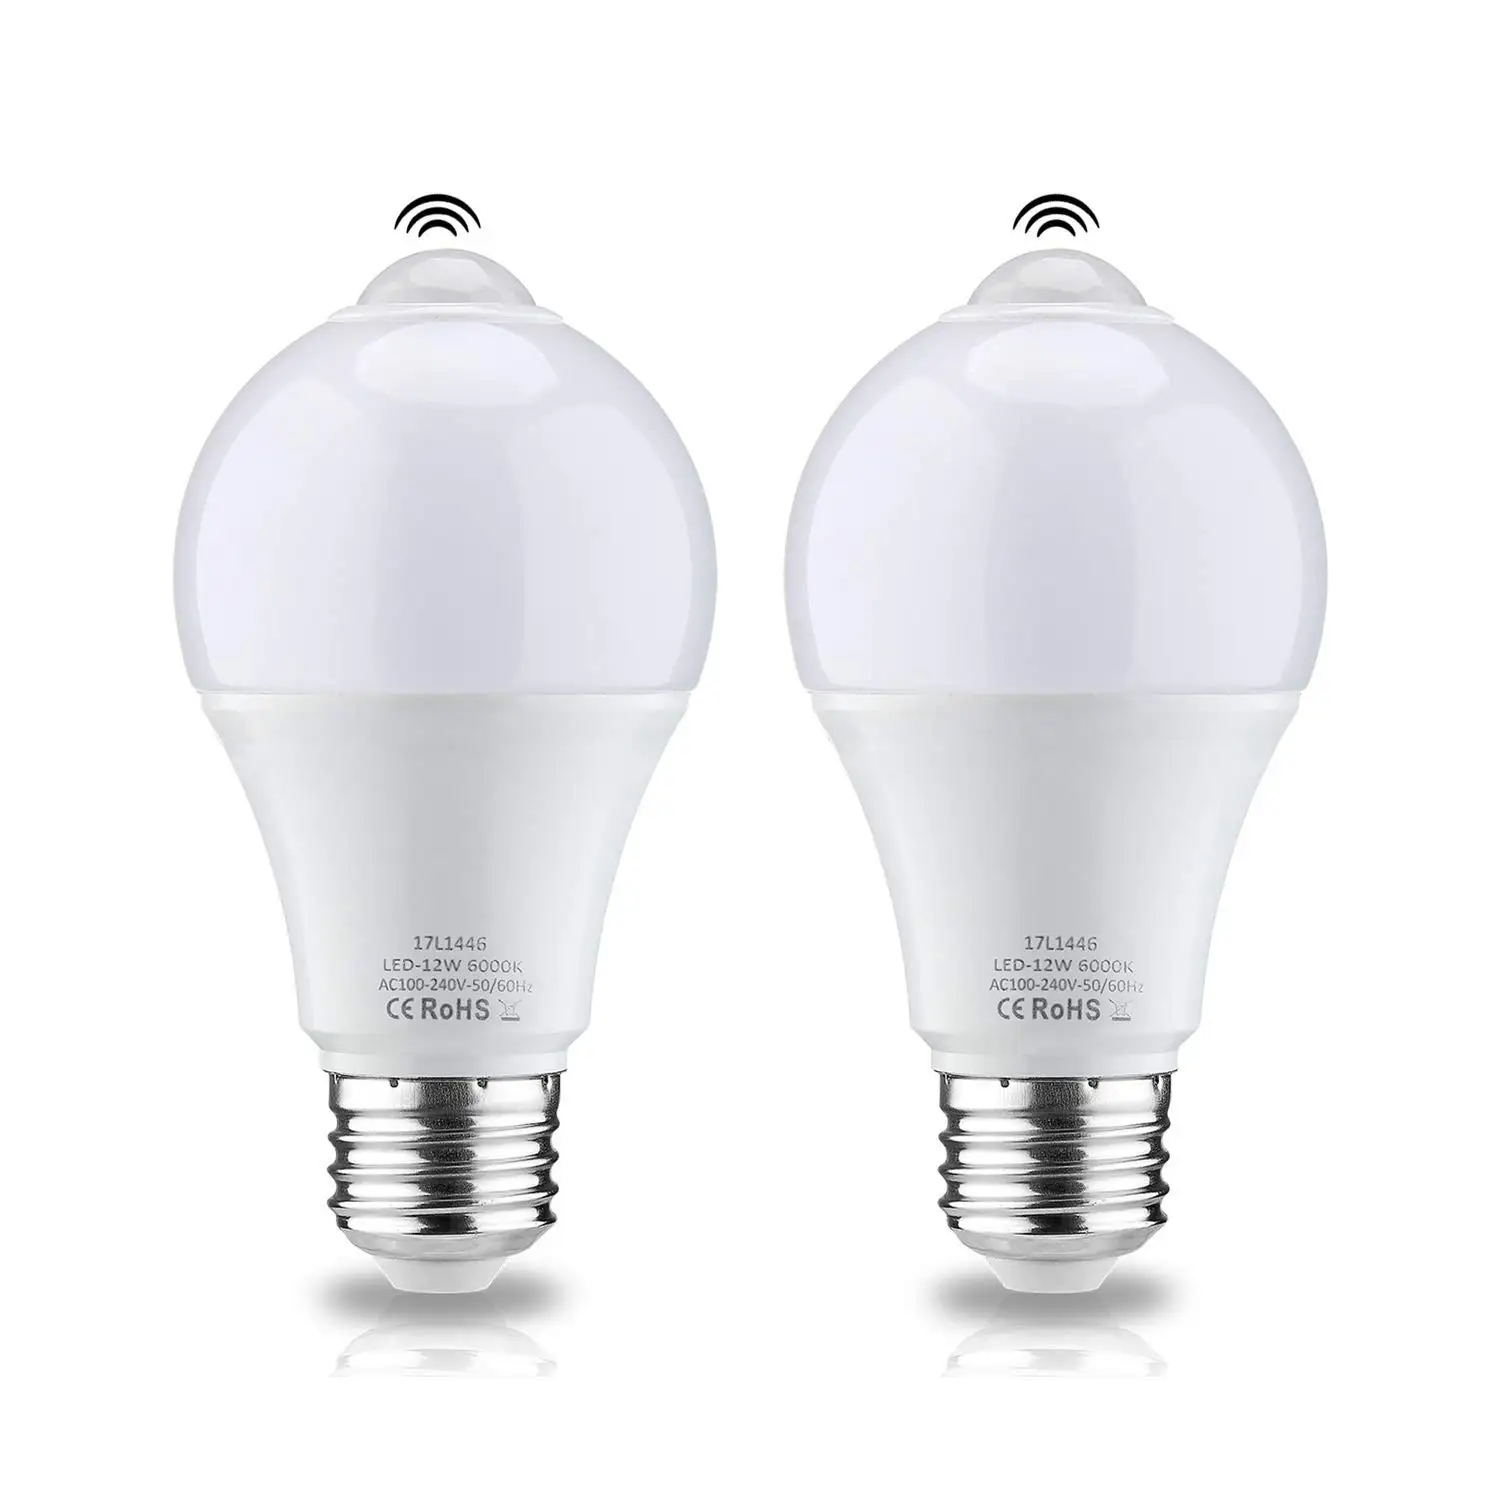 12W Aukora Dusk to Dawn Light Bulb Smart Sensor Light Bulbs Super Bright E26 Automatic On//Off Security Lights Outdoor//Indoor for Porch Garage Garden Patio Cool White 2 Pack 100-Watt Equivalent